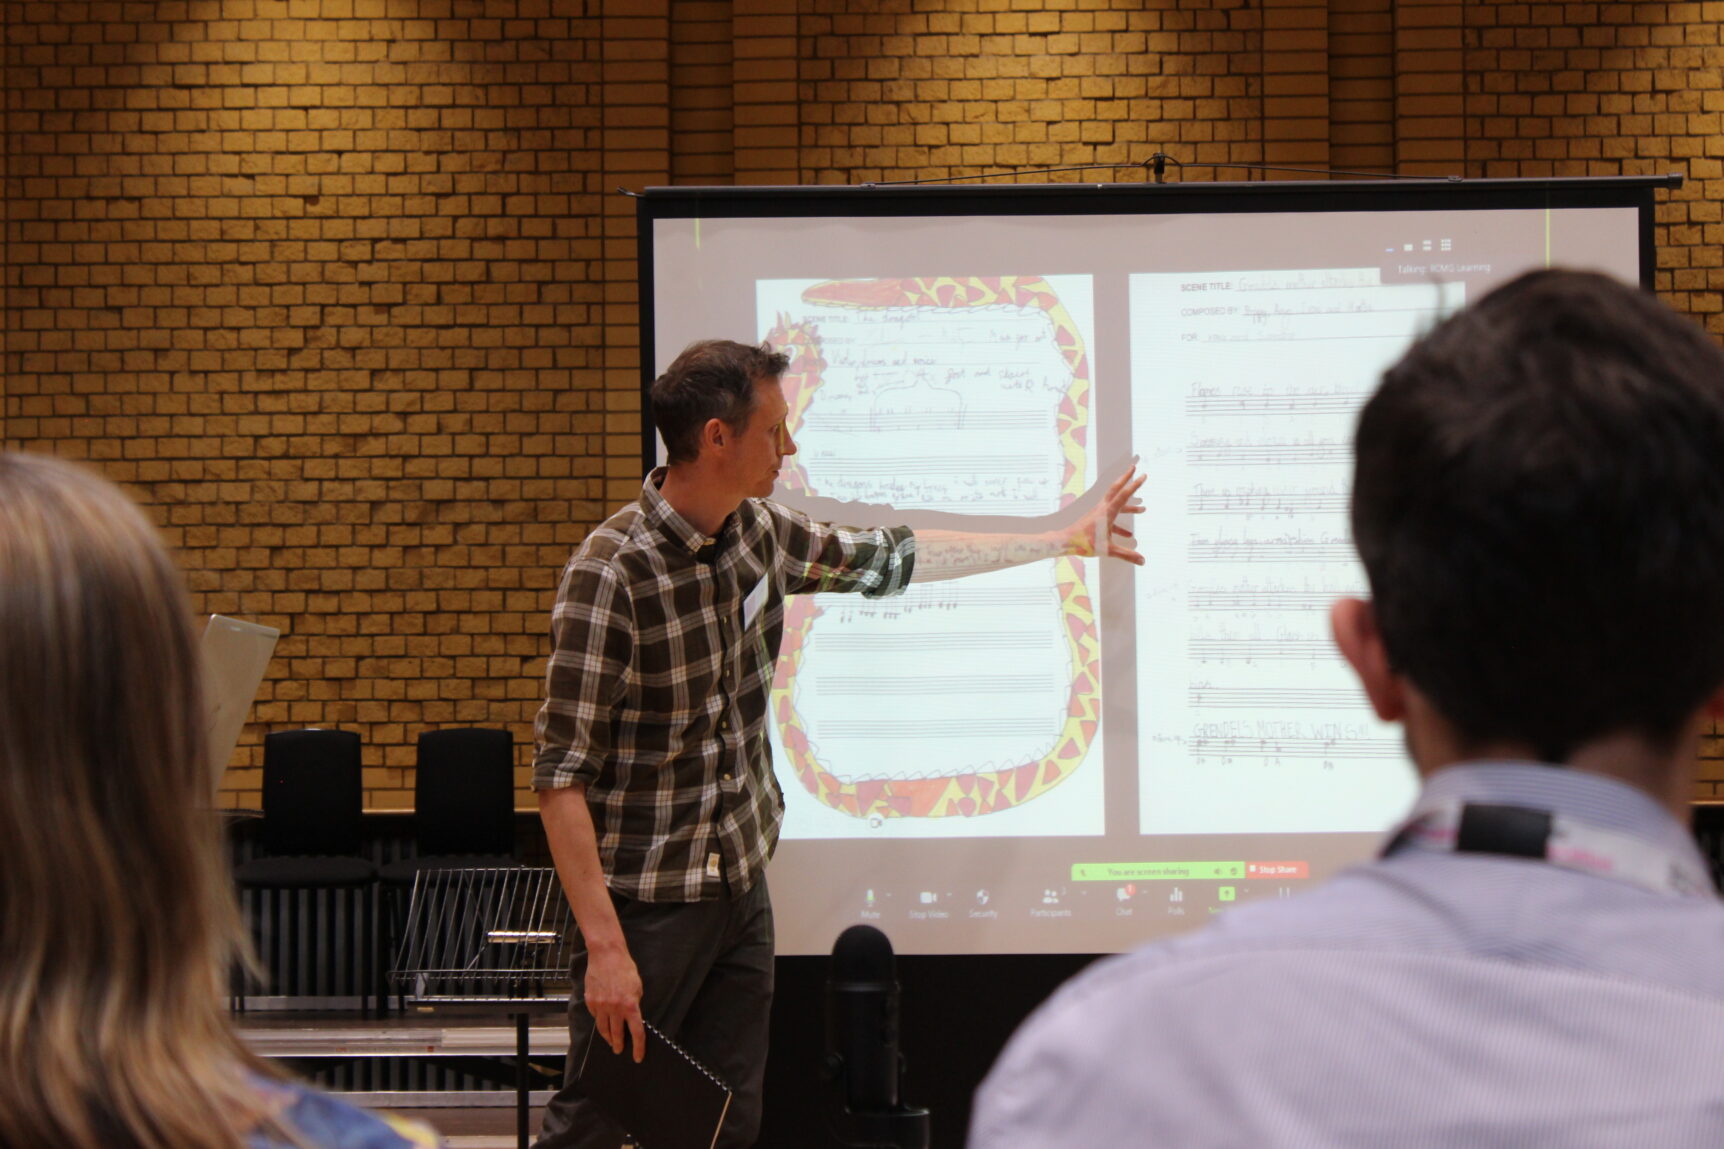 Composer Richard Bernard points to a white board showing an illustrated score. There are attendees in the foreground watching the presentation. The environment is the CBSO.